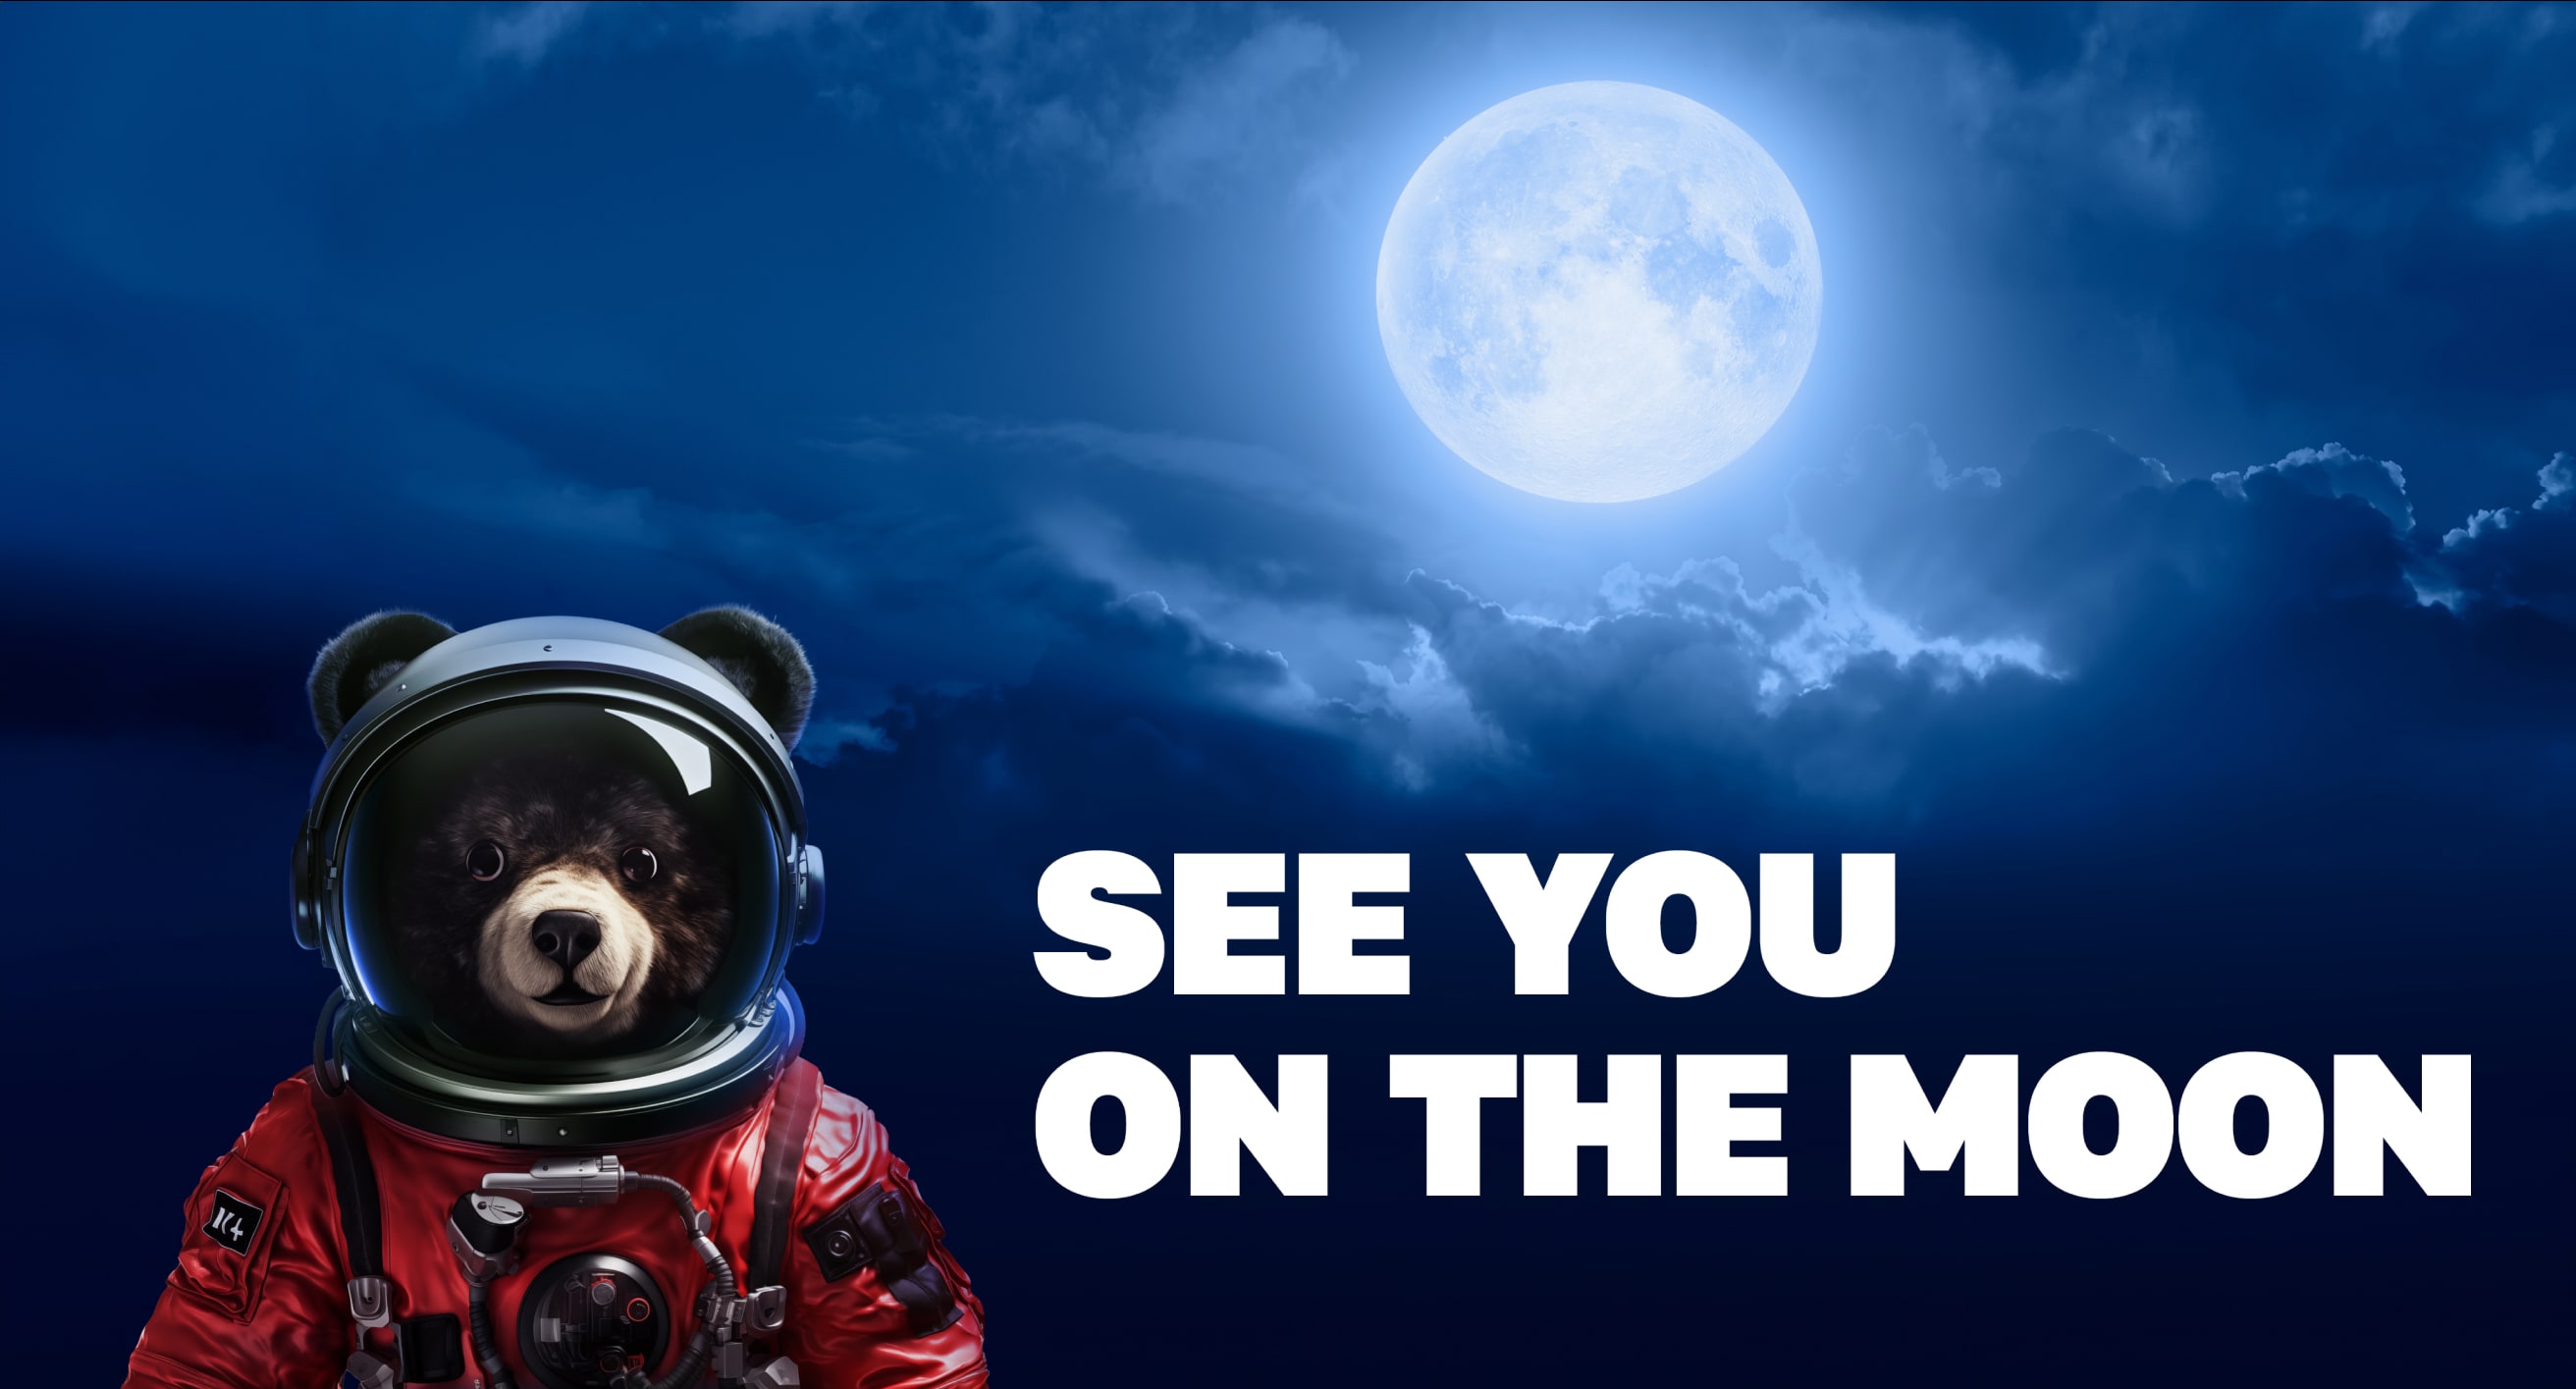 See you on the moon